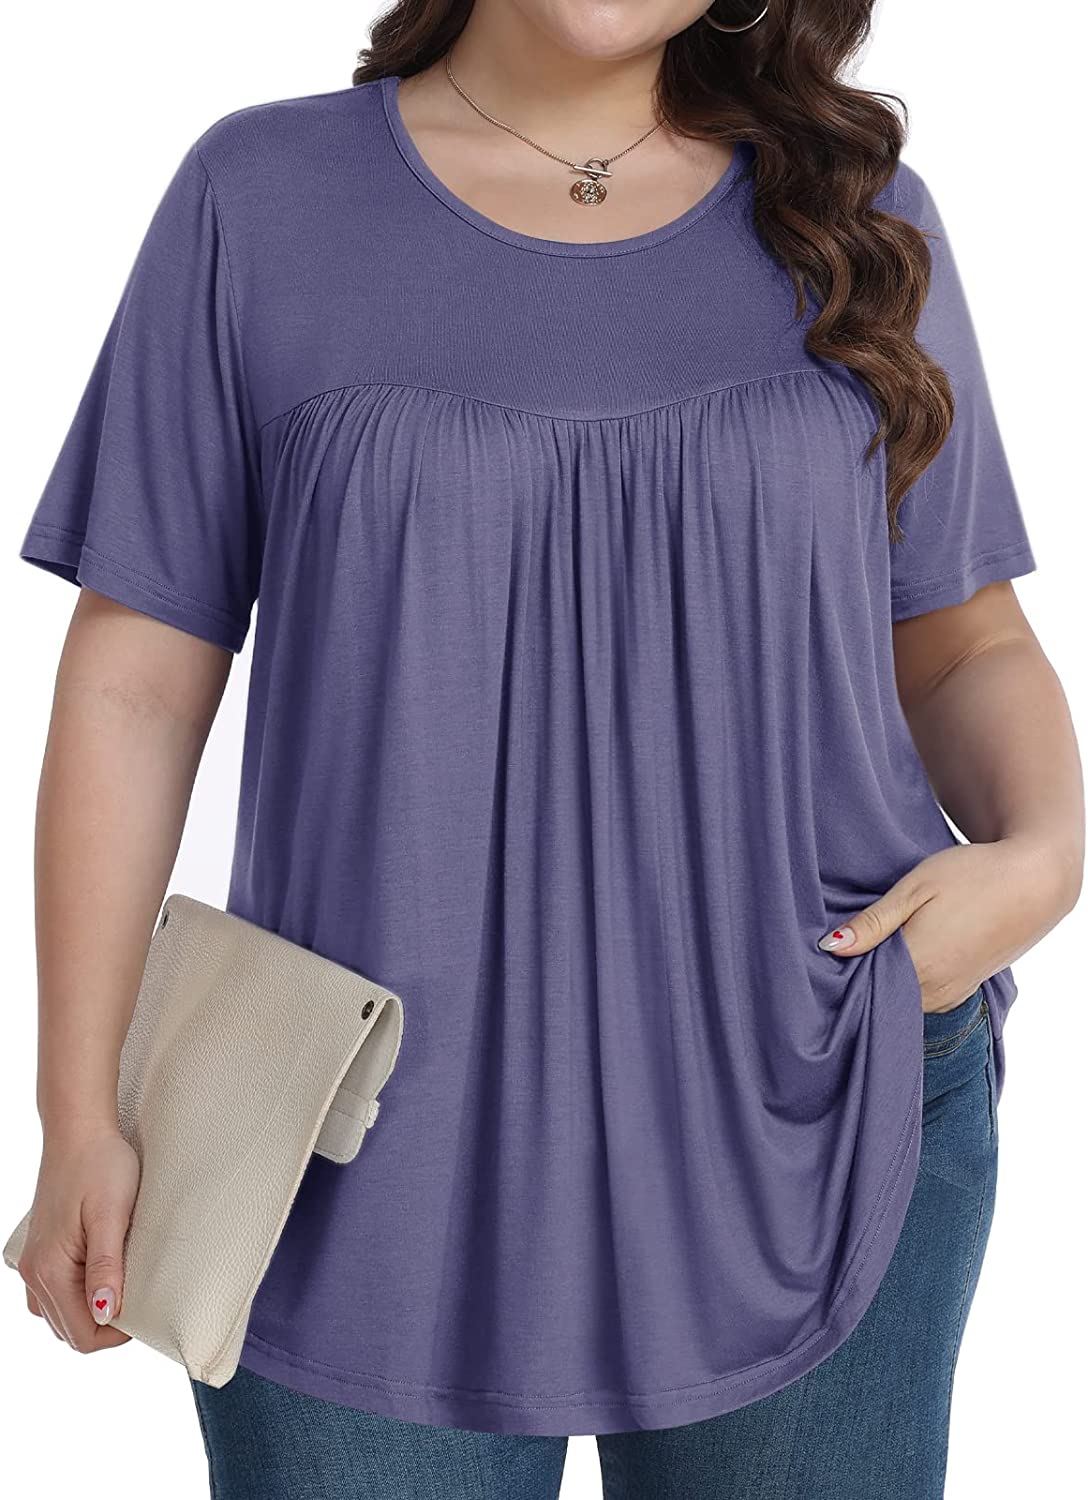 Tencede Womens Plus Size Tops Shirts Short Sleeve Crew Neck Tunic